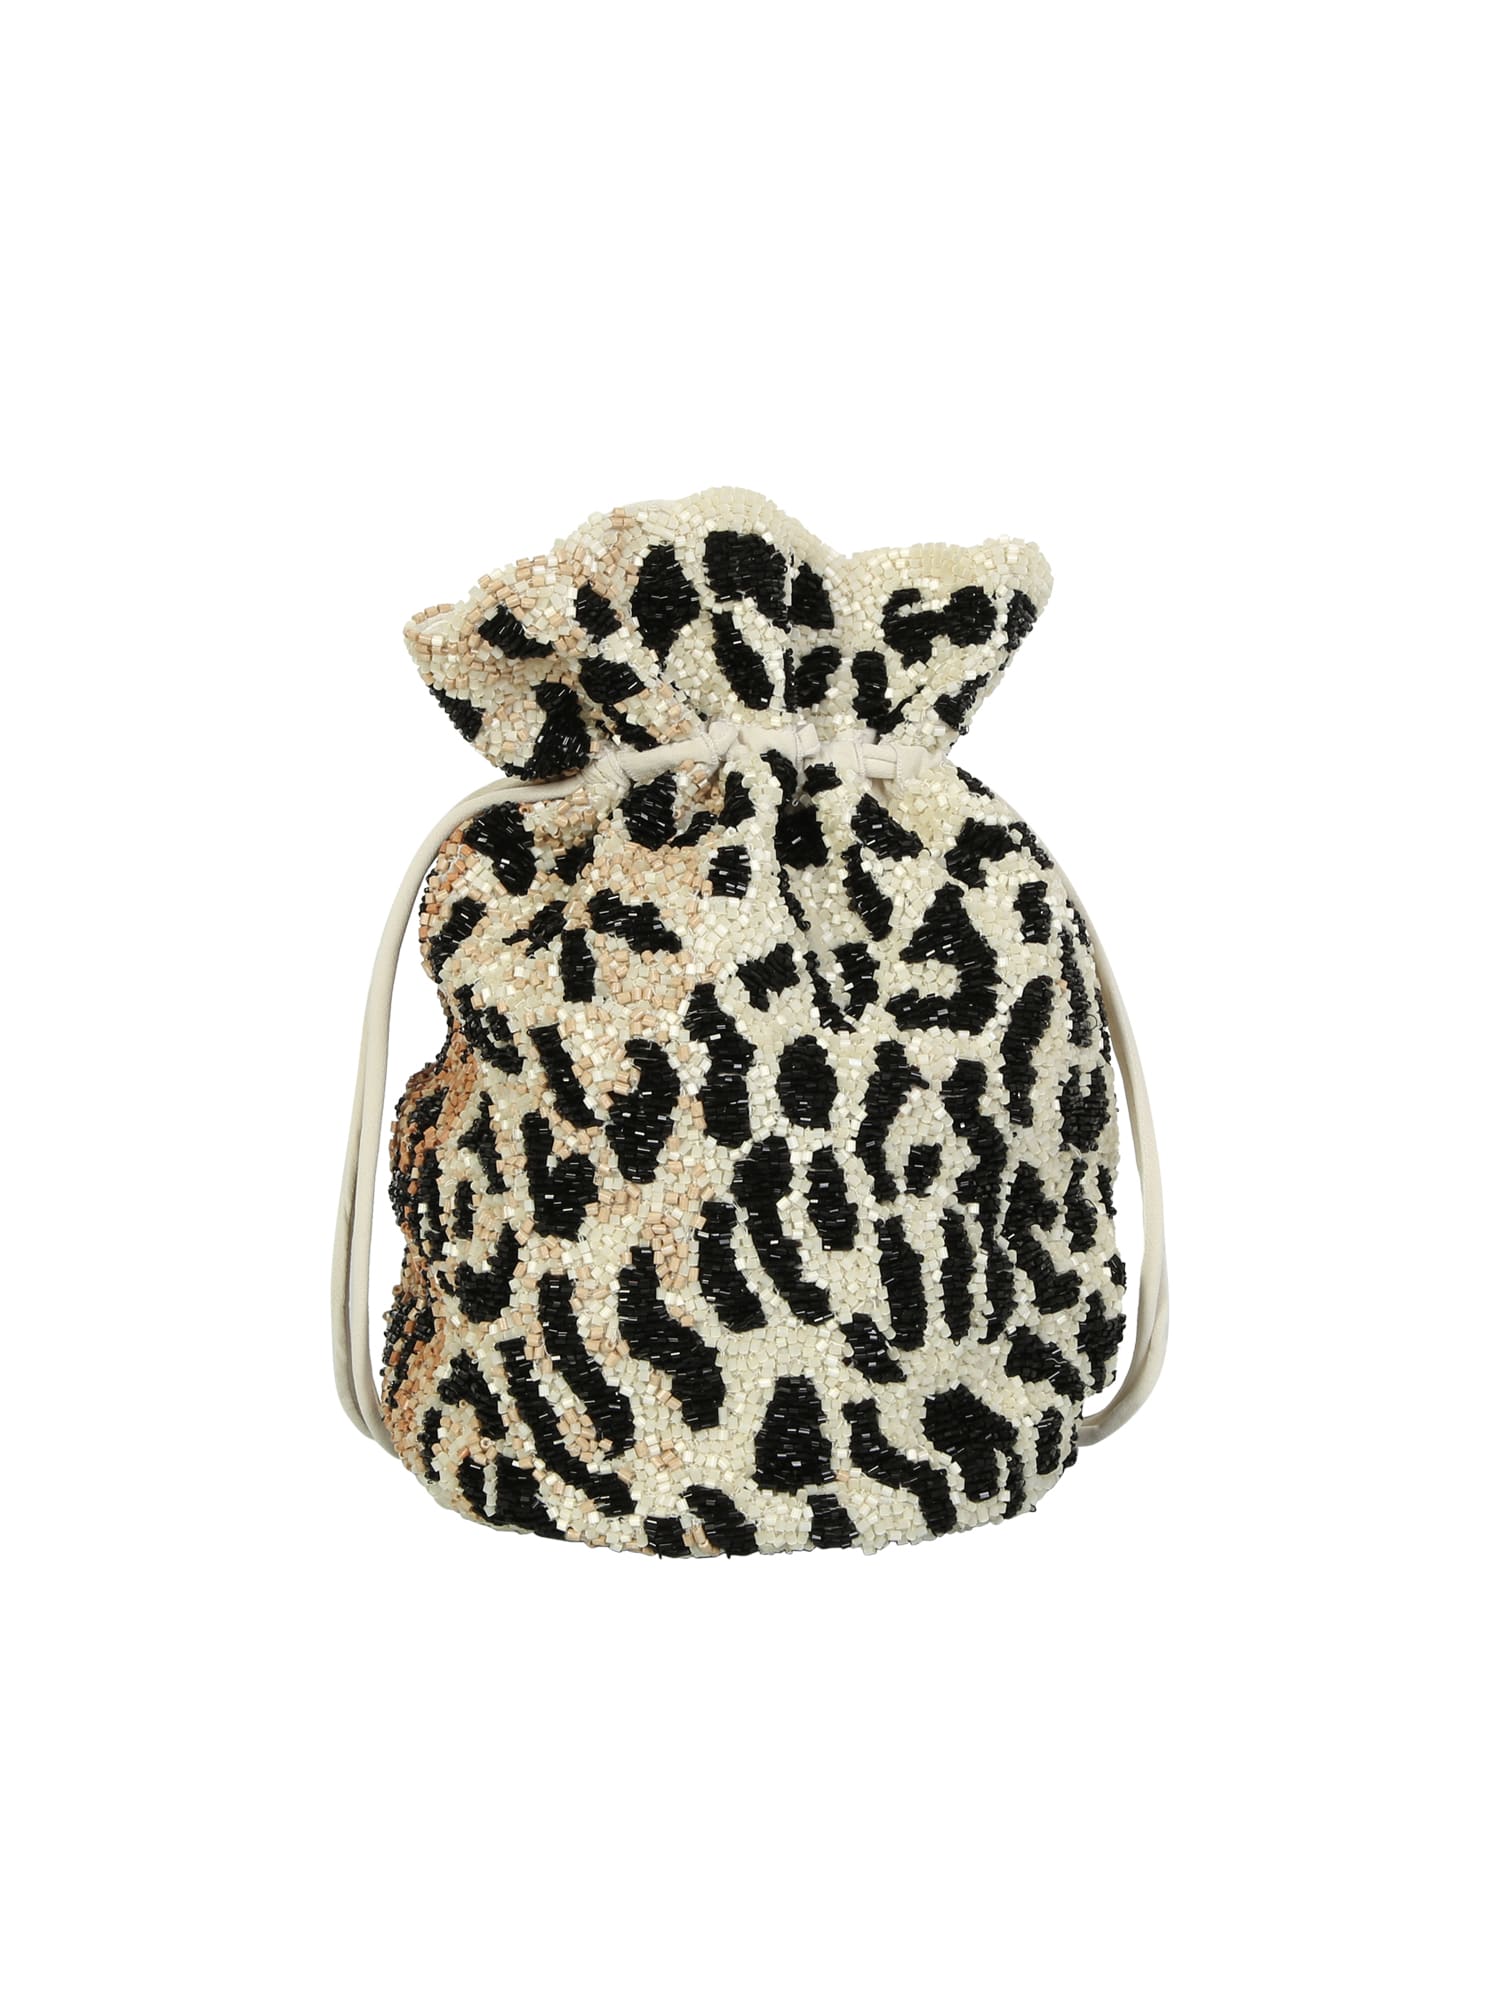 Featuring Bright Beading And A Leopard Print, The Ganni Handbag Is Ideal For Wearing